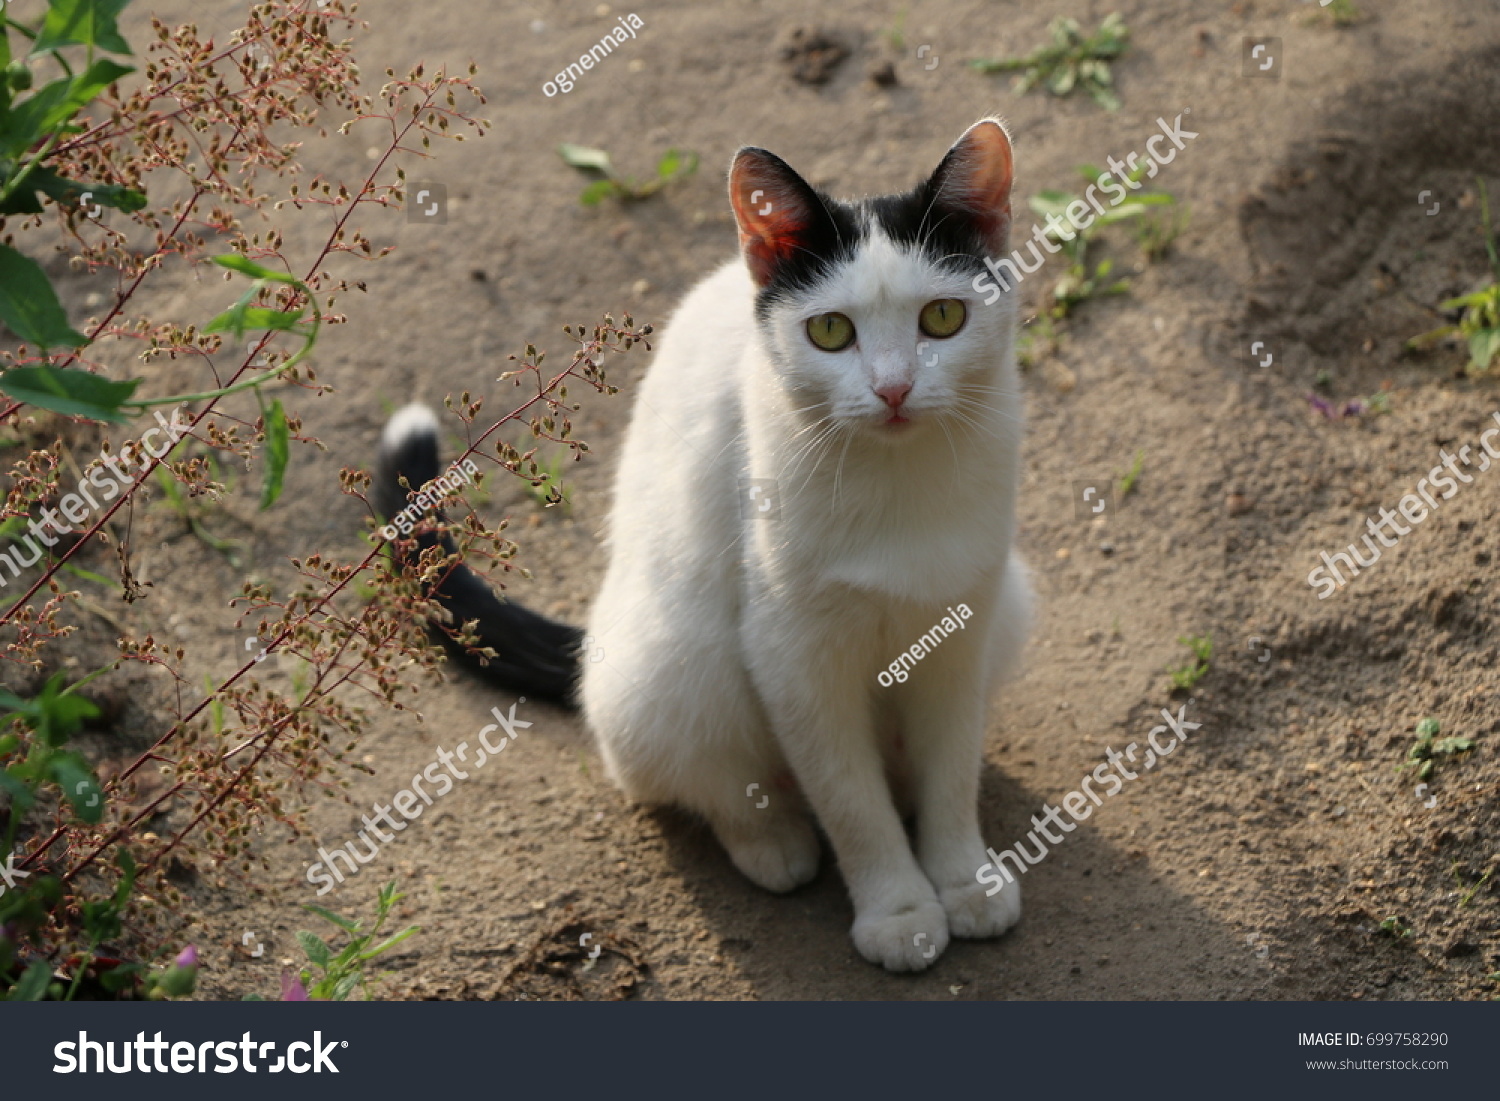 white cat with grey ears and tail